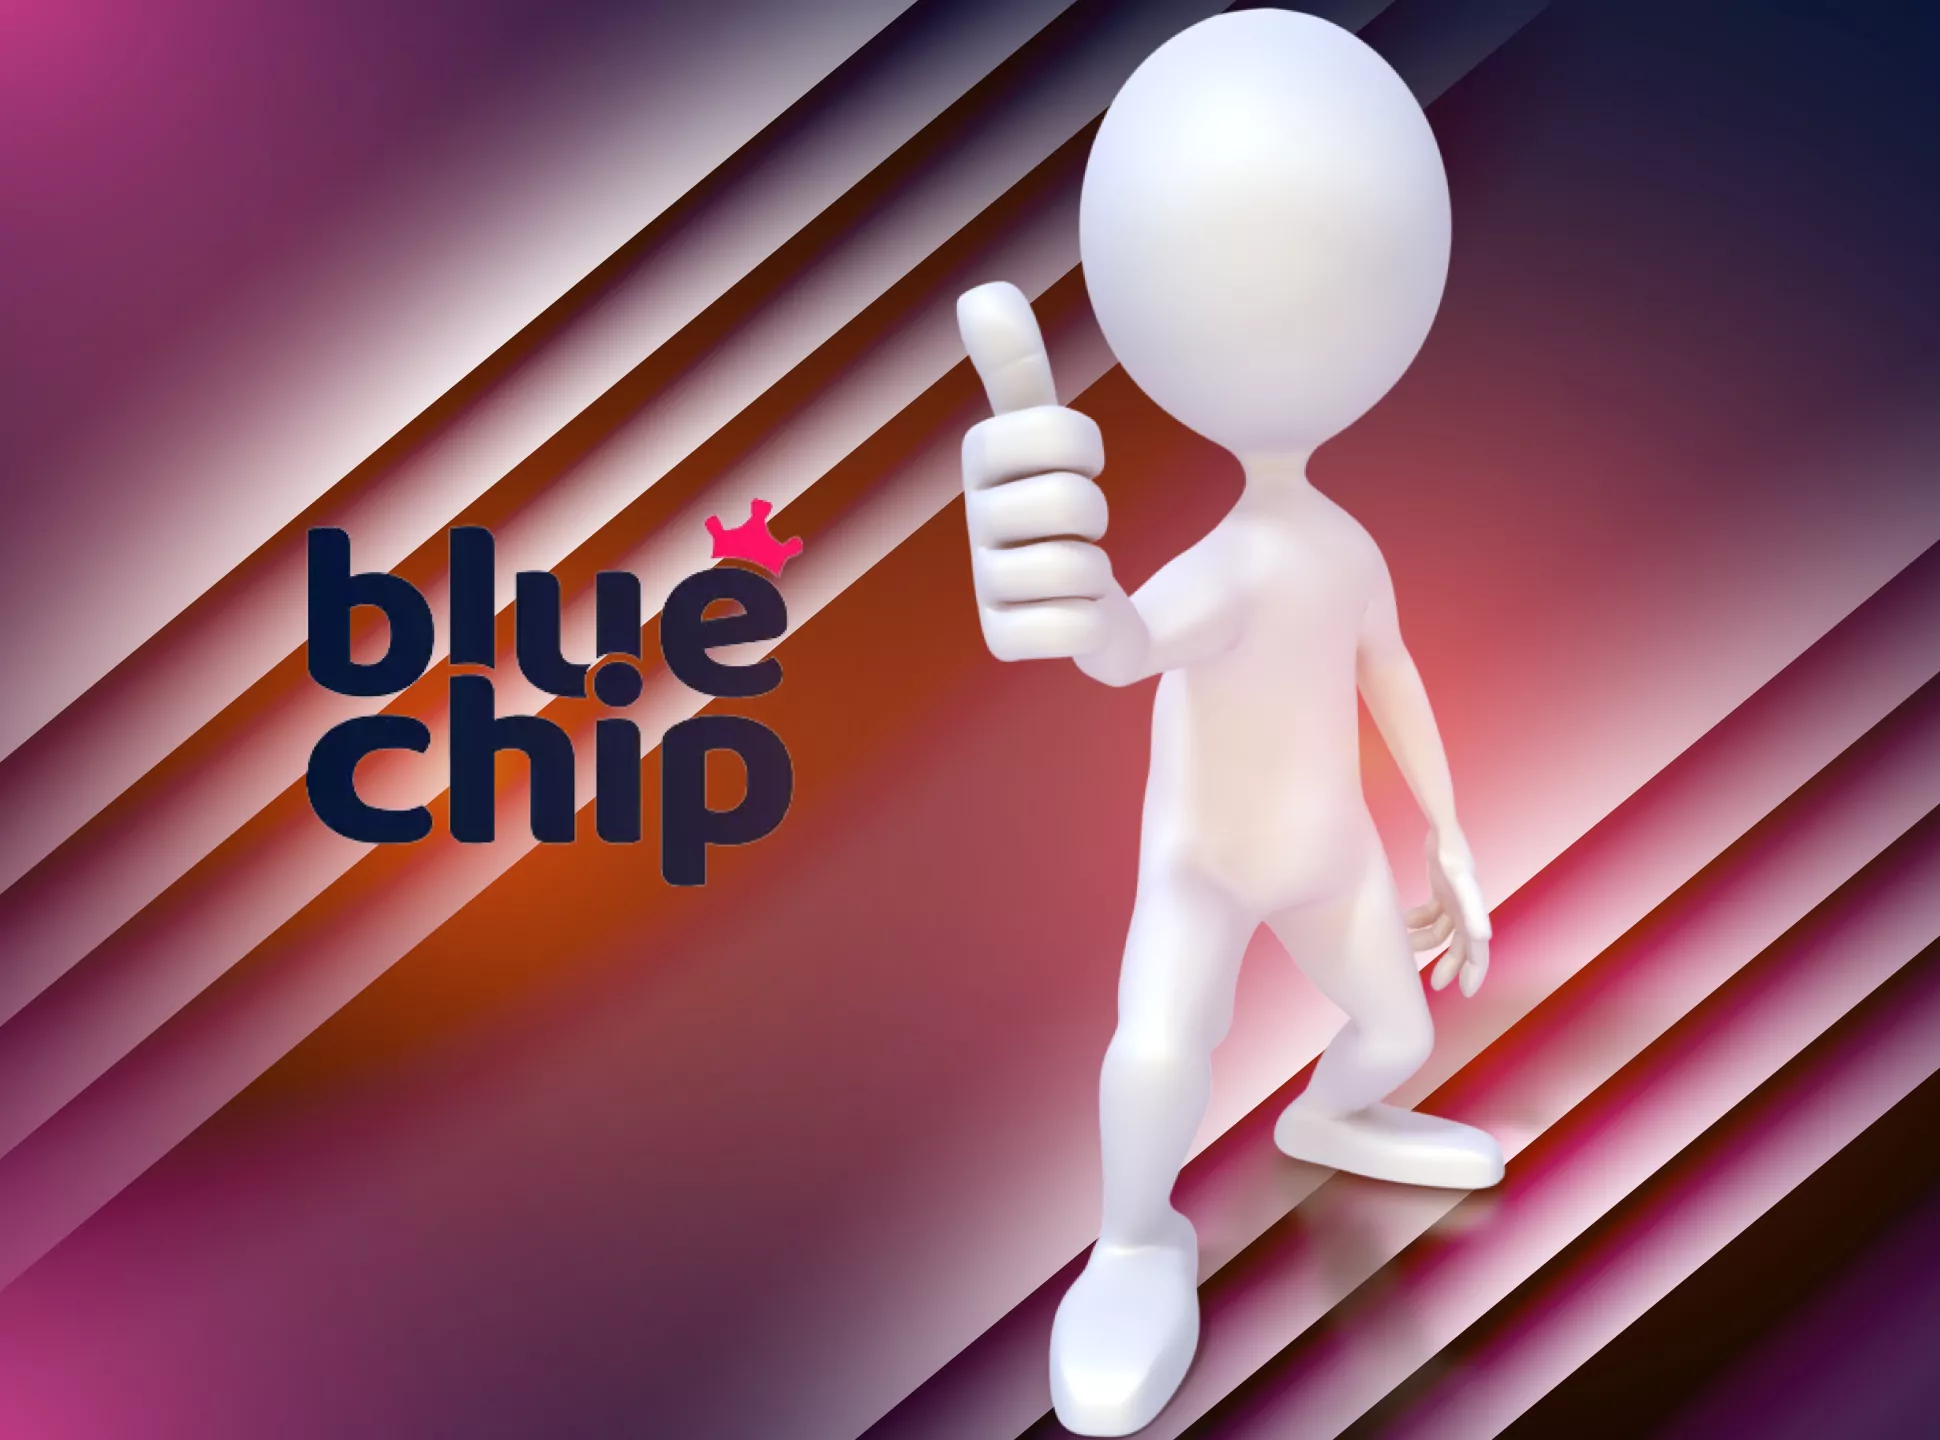 Sogn up for Bluechip and check out all the usefull featires and betting possibilities.